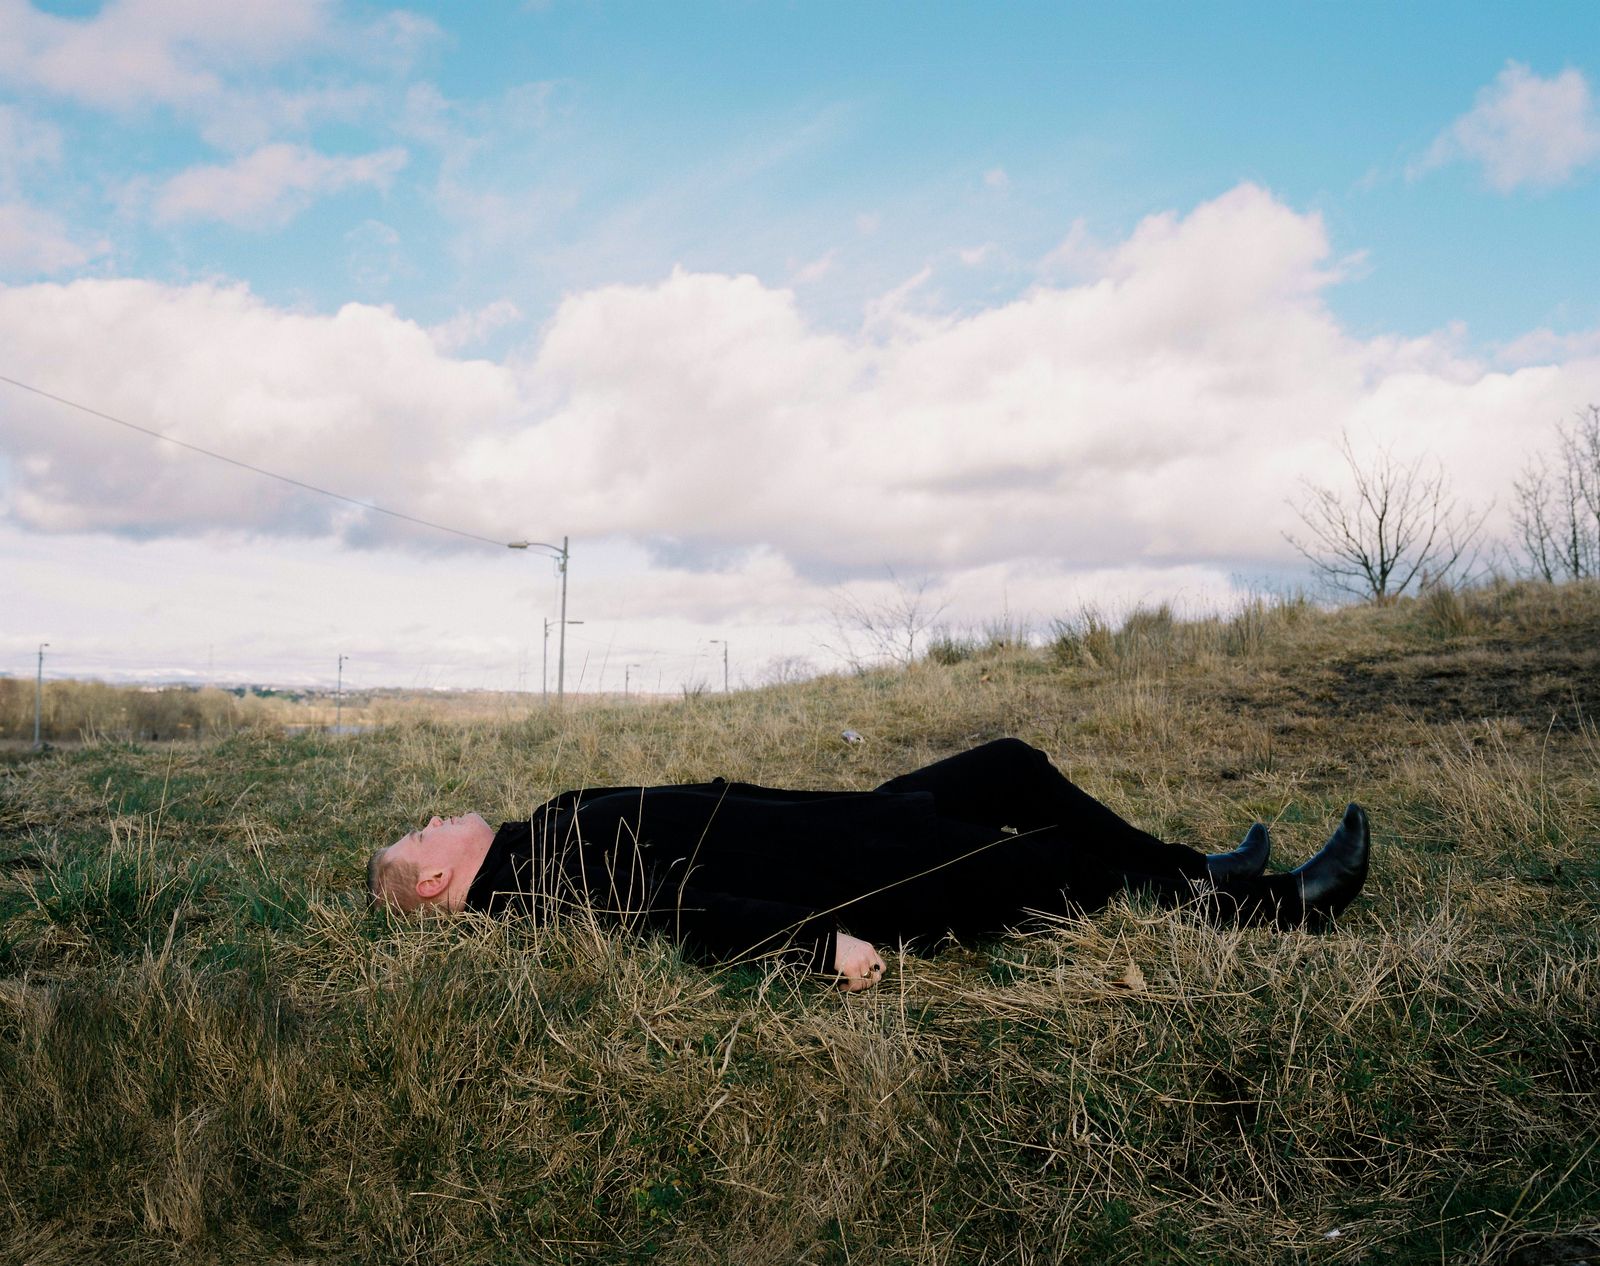 © Kirsty Mackay - Billy age 19 lies on the ground where council housing once stood, Easterhouse.